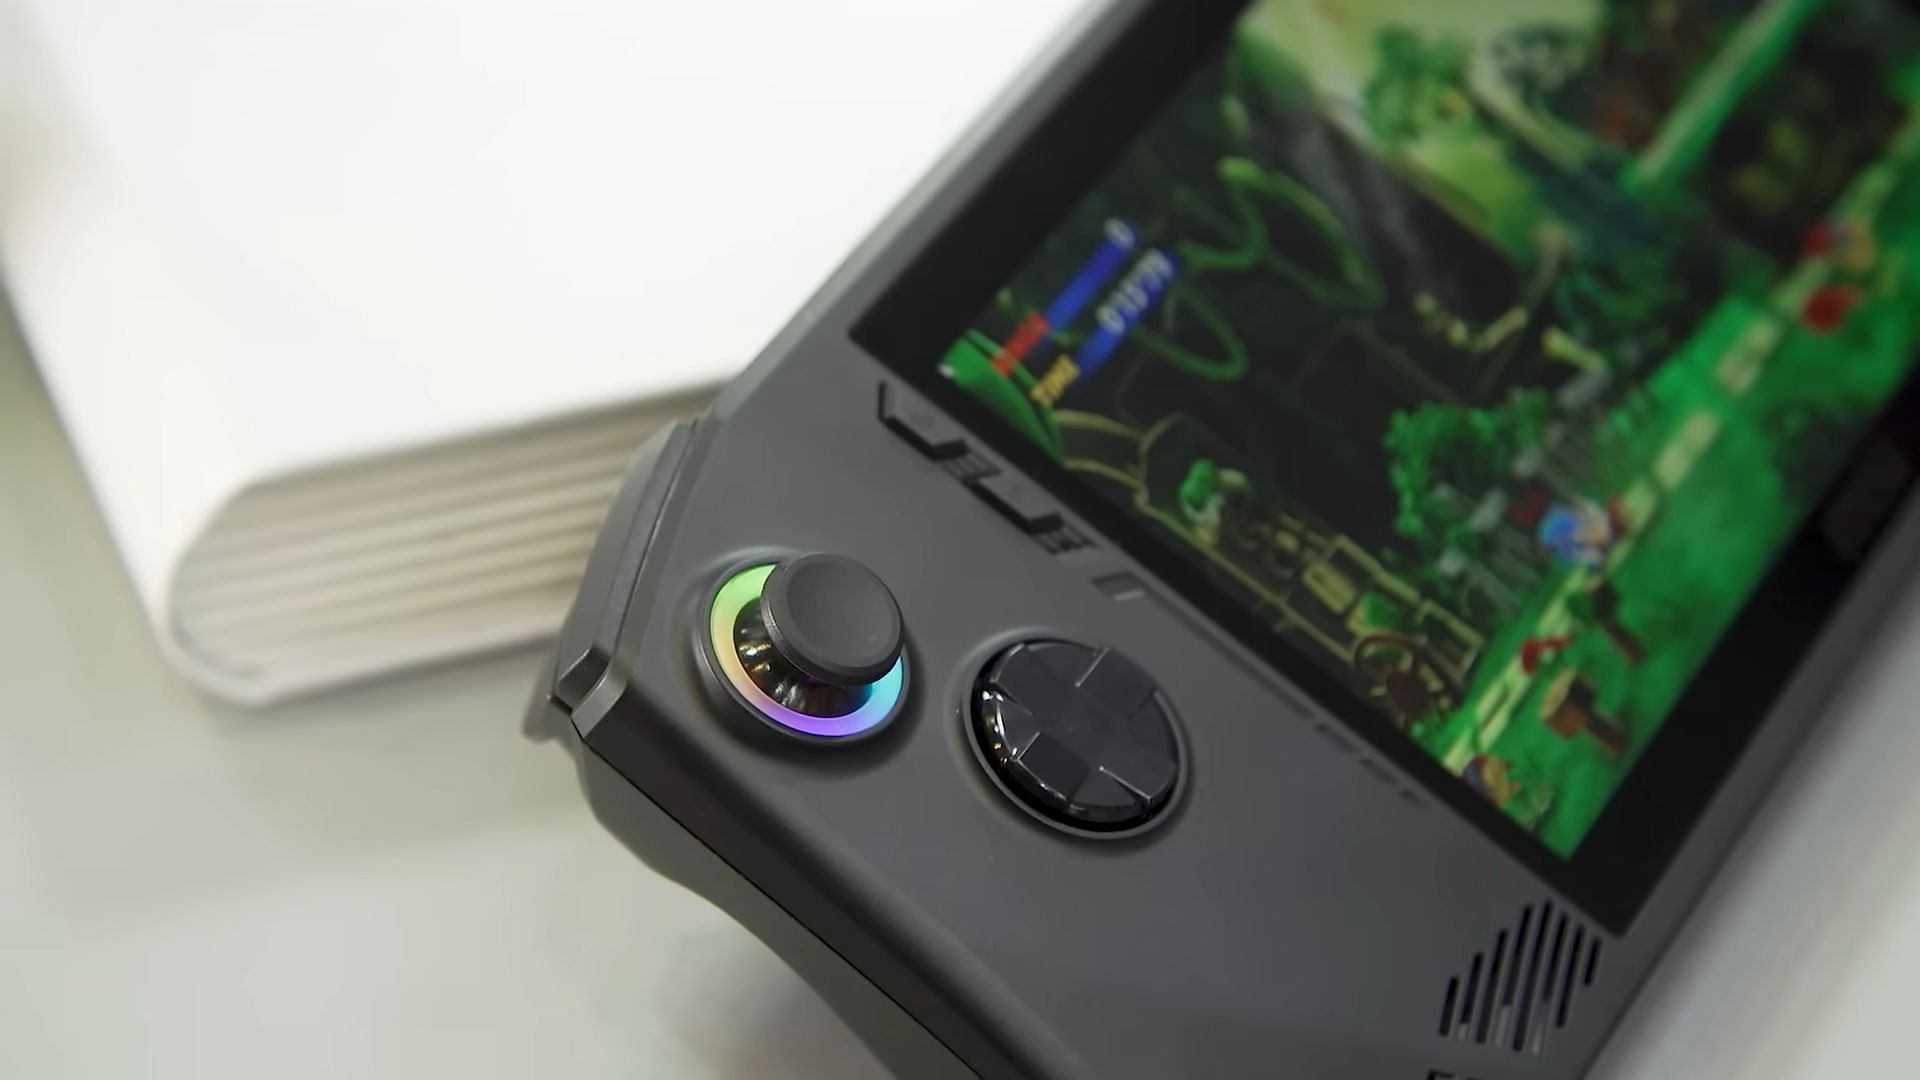 MSI Claw handheld gaming device (Image via Engadget/YouTube)